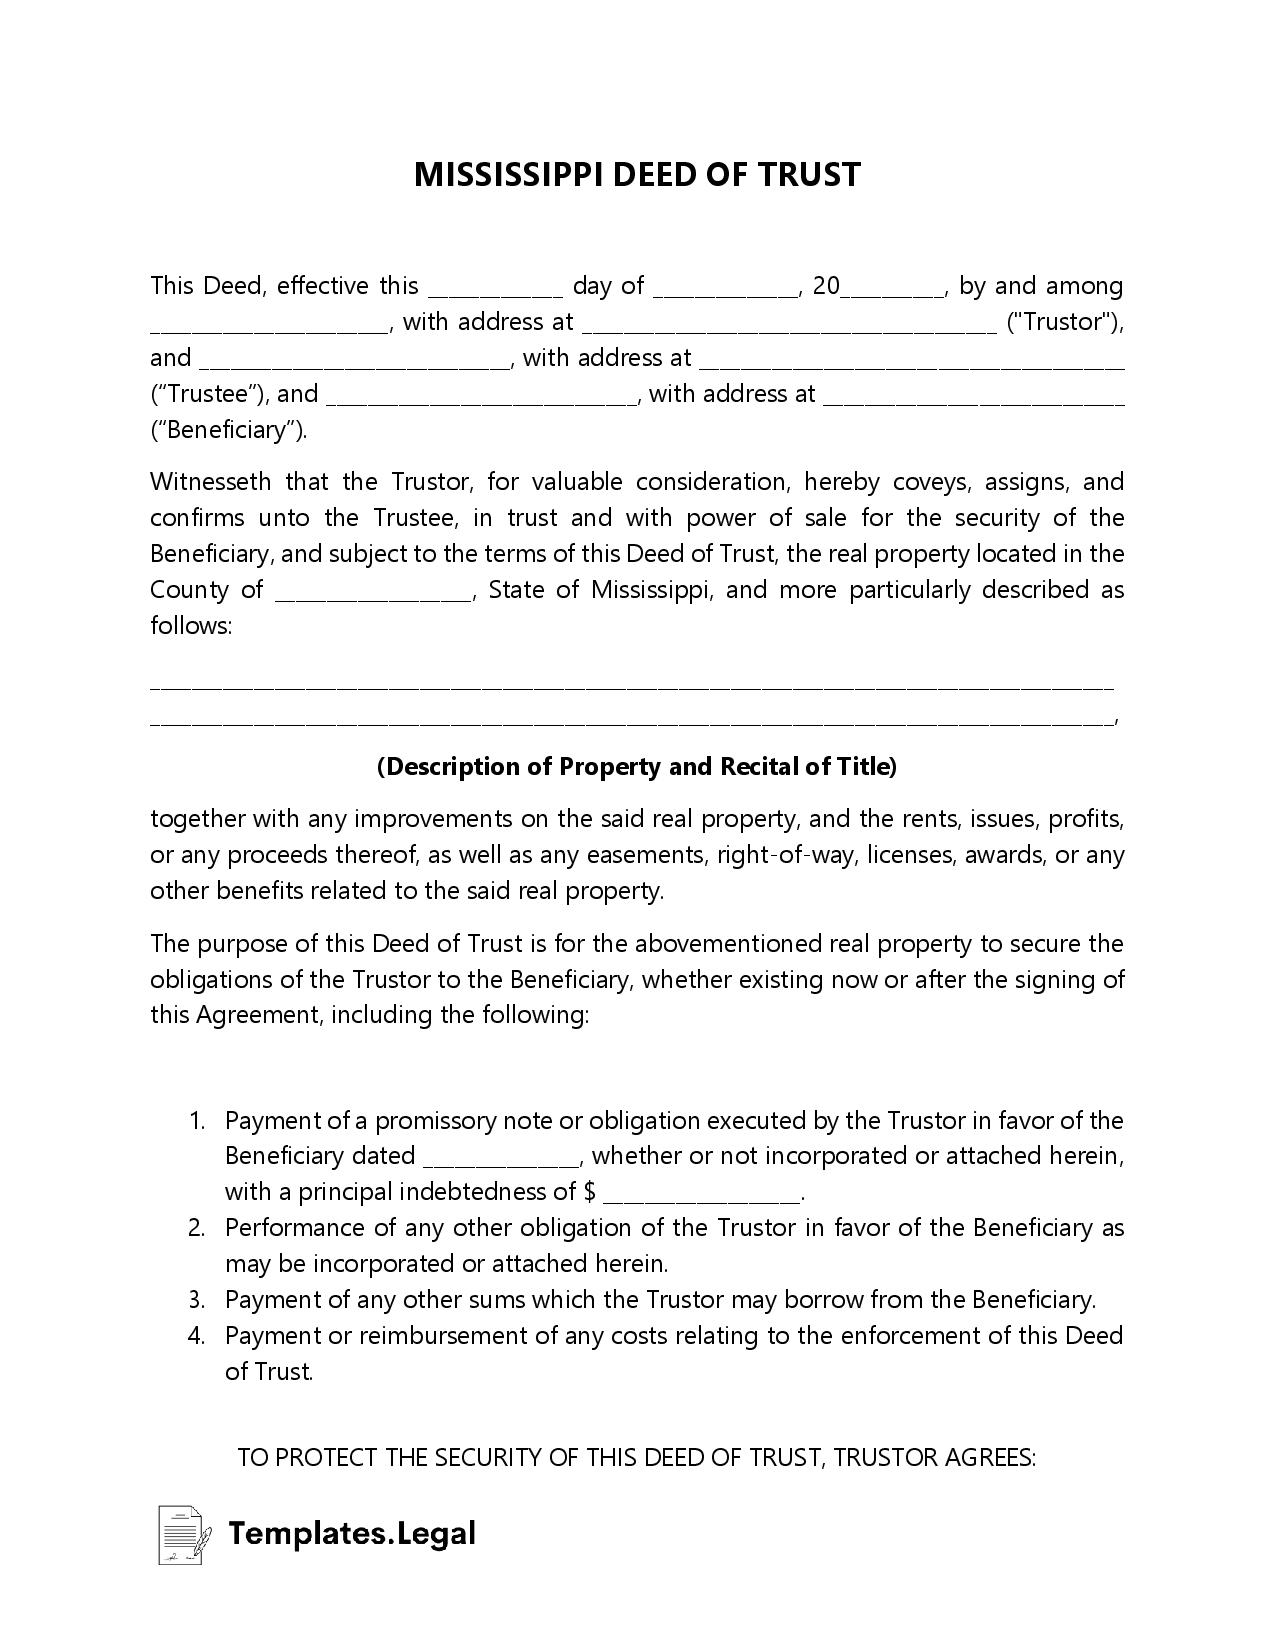 Mississippi Deed of Trust - Templates.Legal